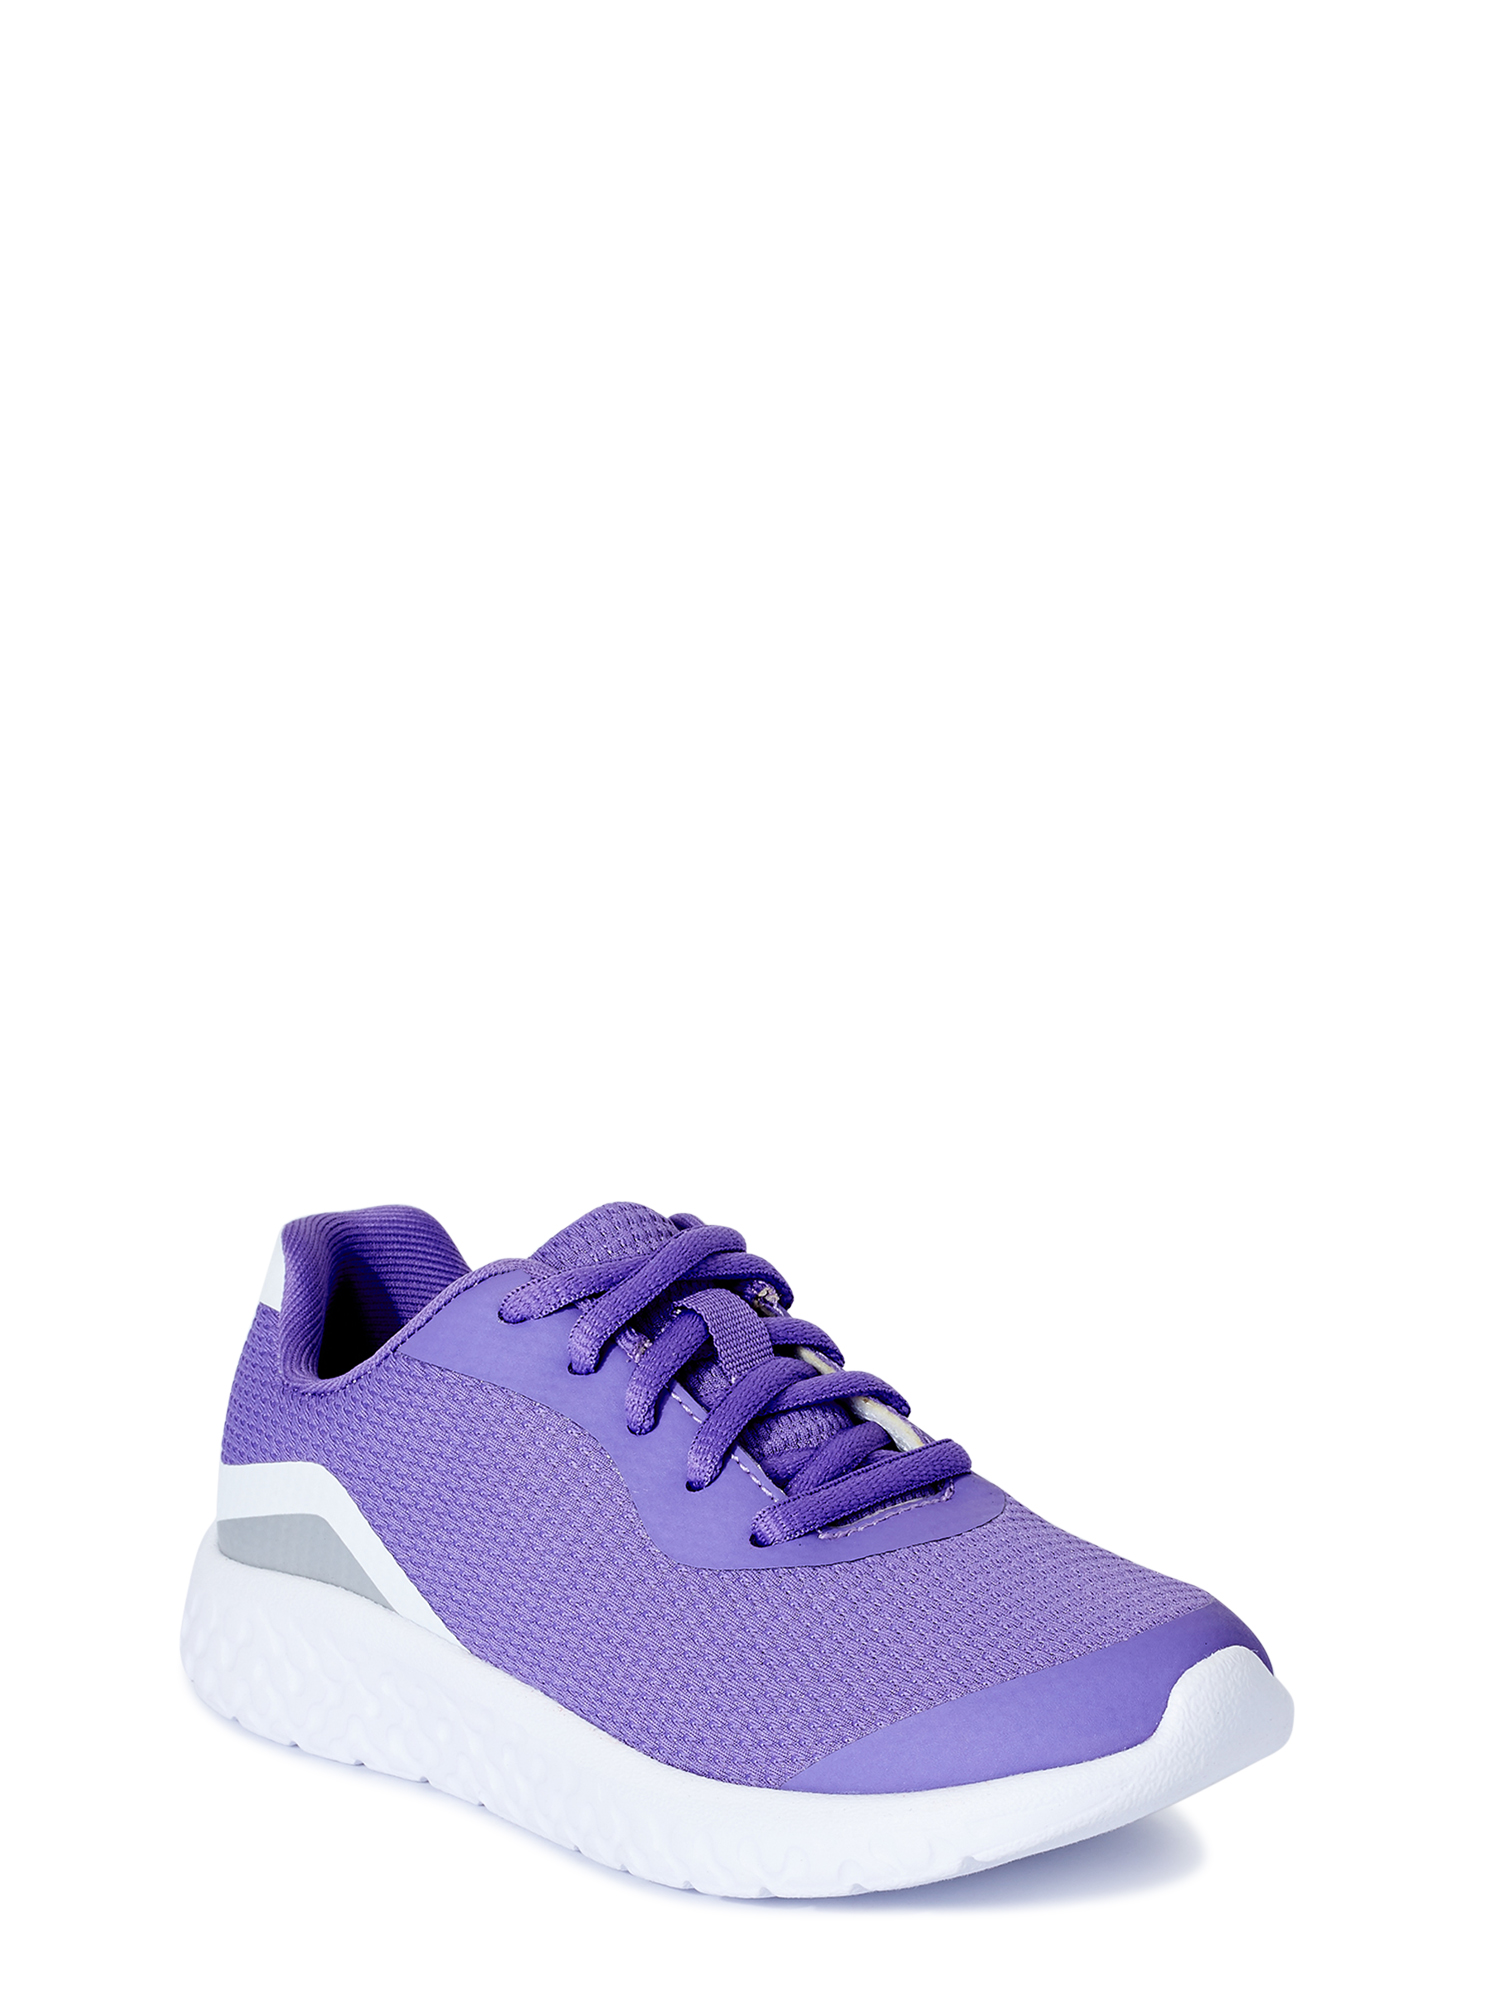 Athletic Works Core Lightweight Athletic Sneaker (Little Girls & Big Girls) - image 1 of 6